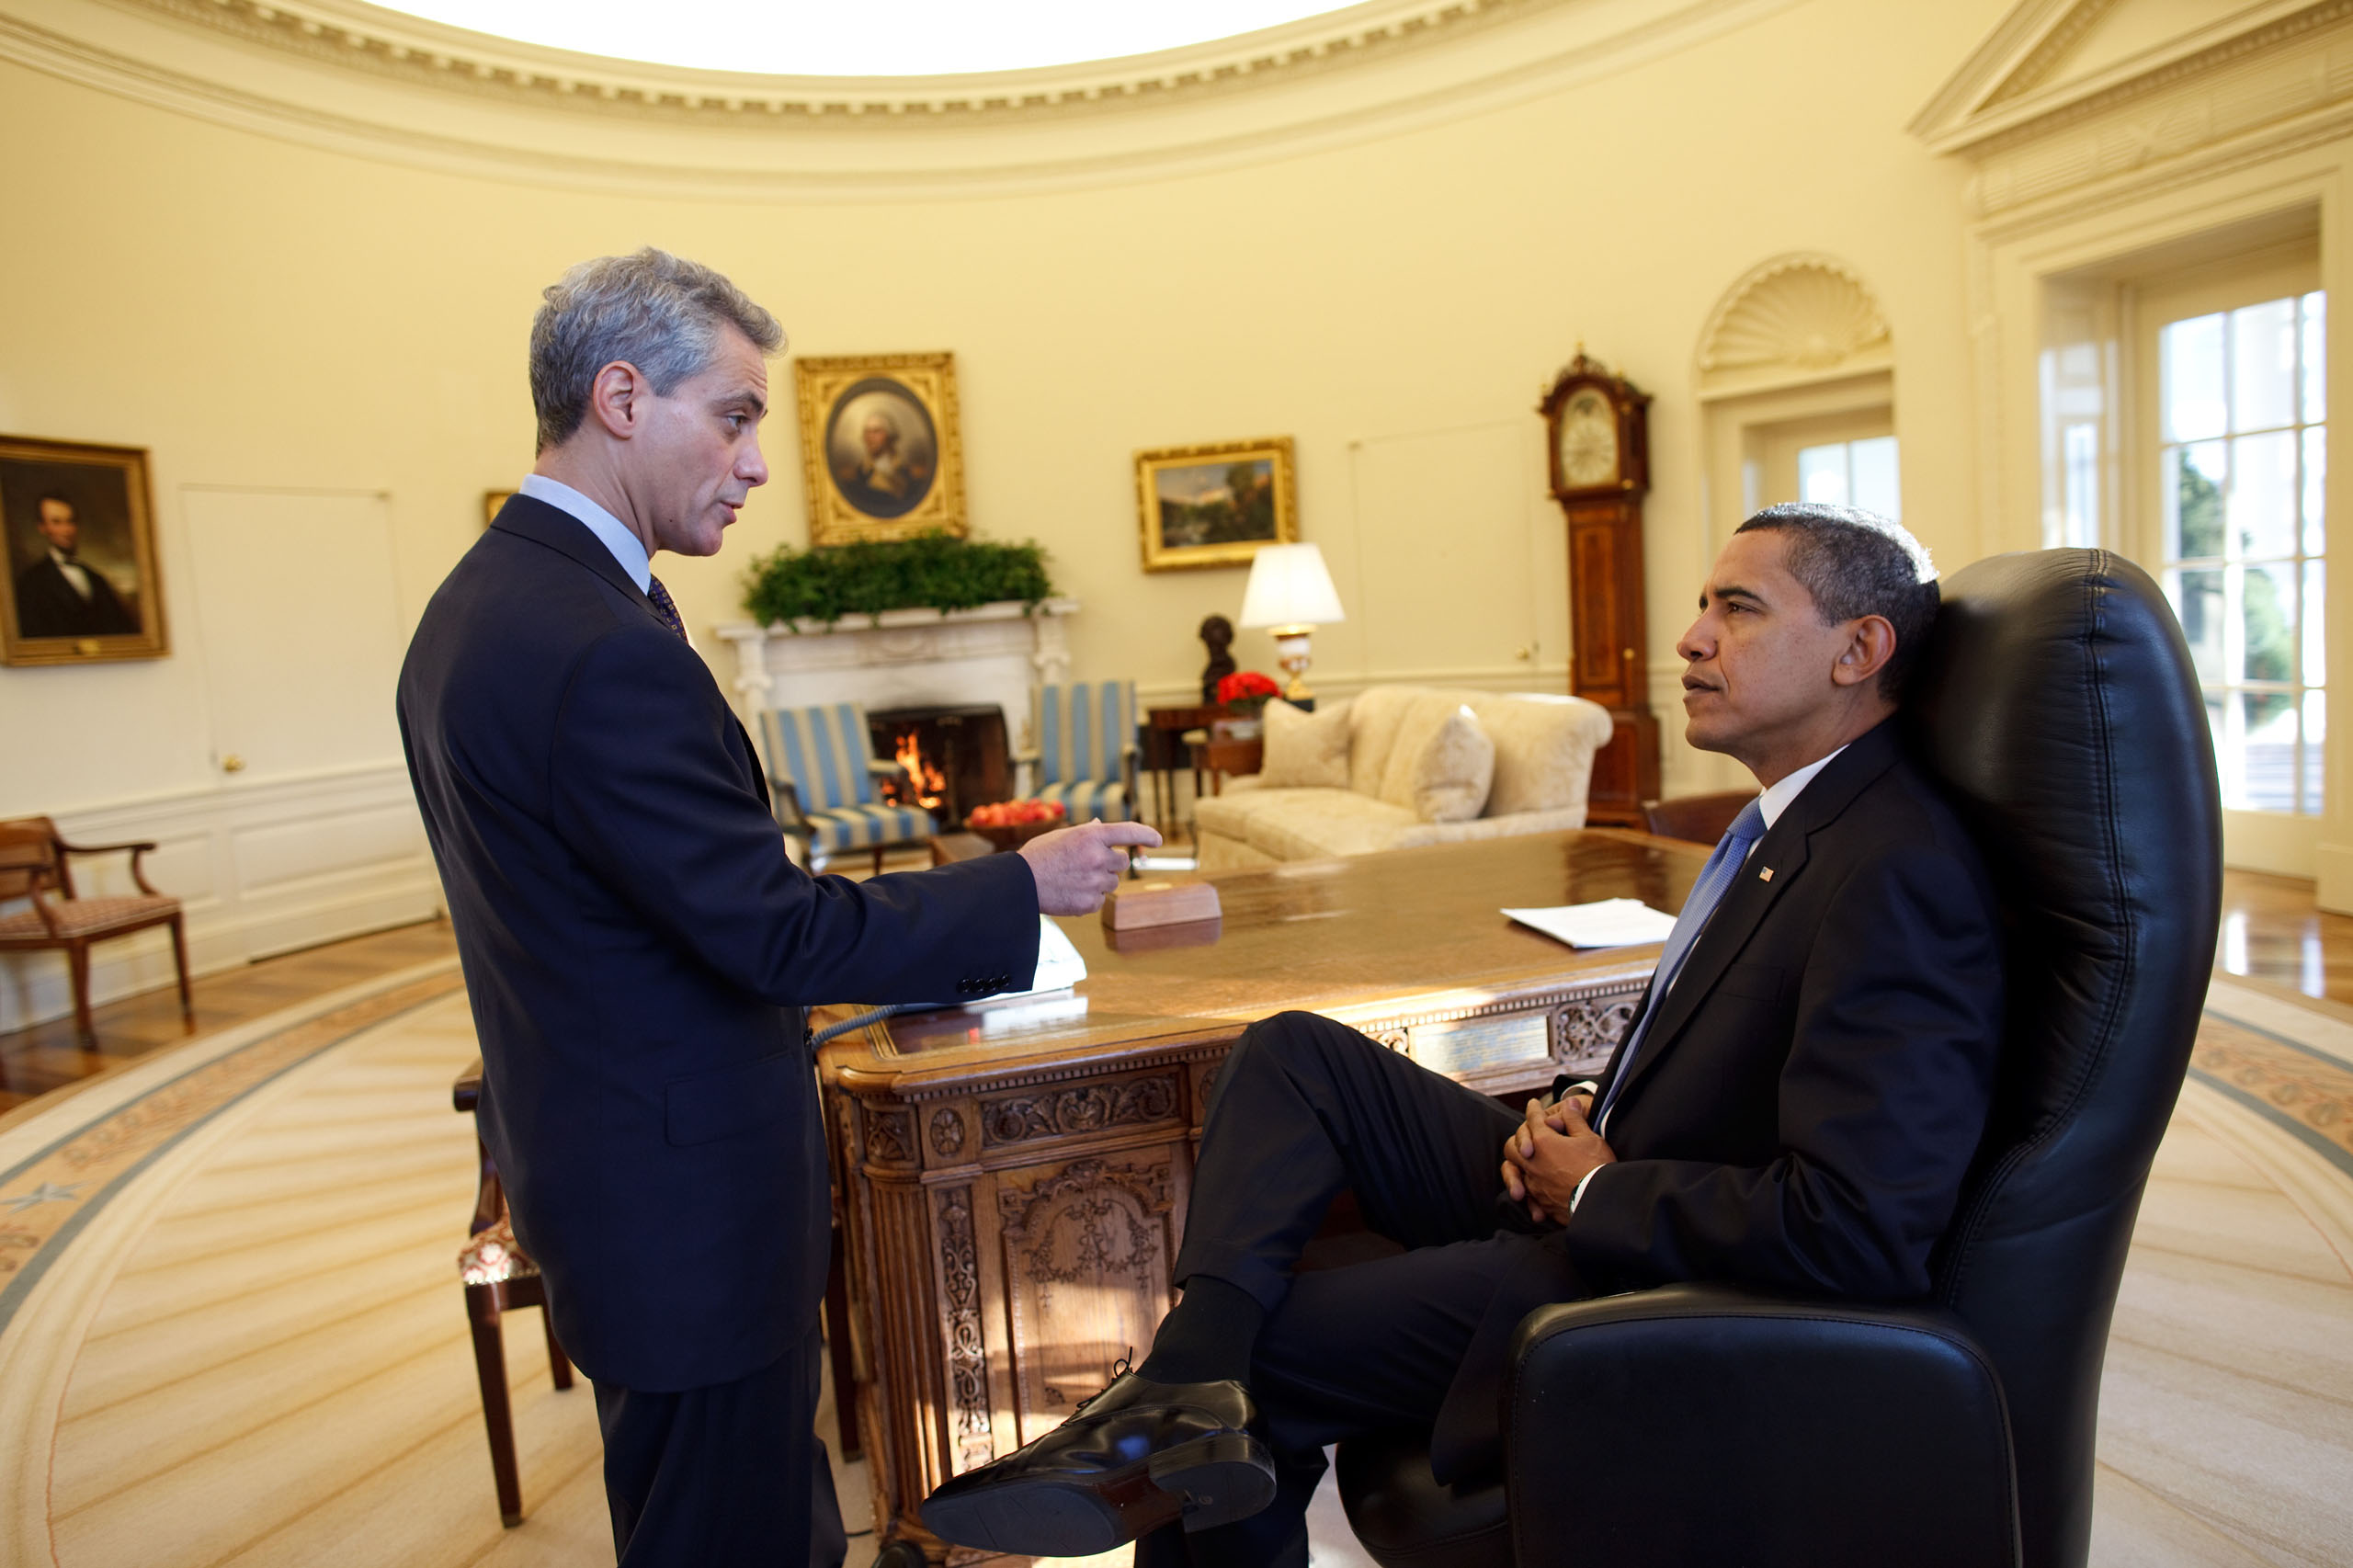 President Barack Obama meets alone with Chief of Staff Rahm Emanuel in the Oval Office on his first full day in office on Jan. 21, 2009.